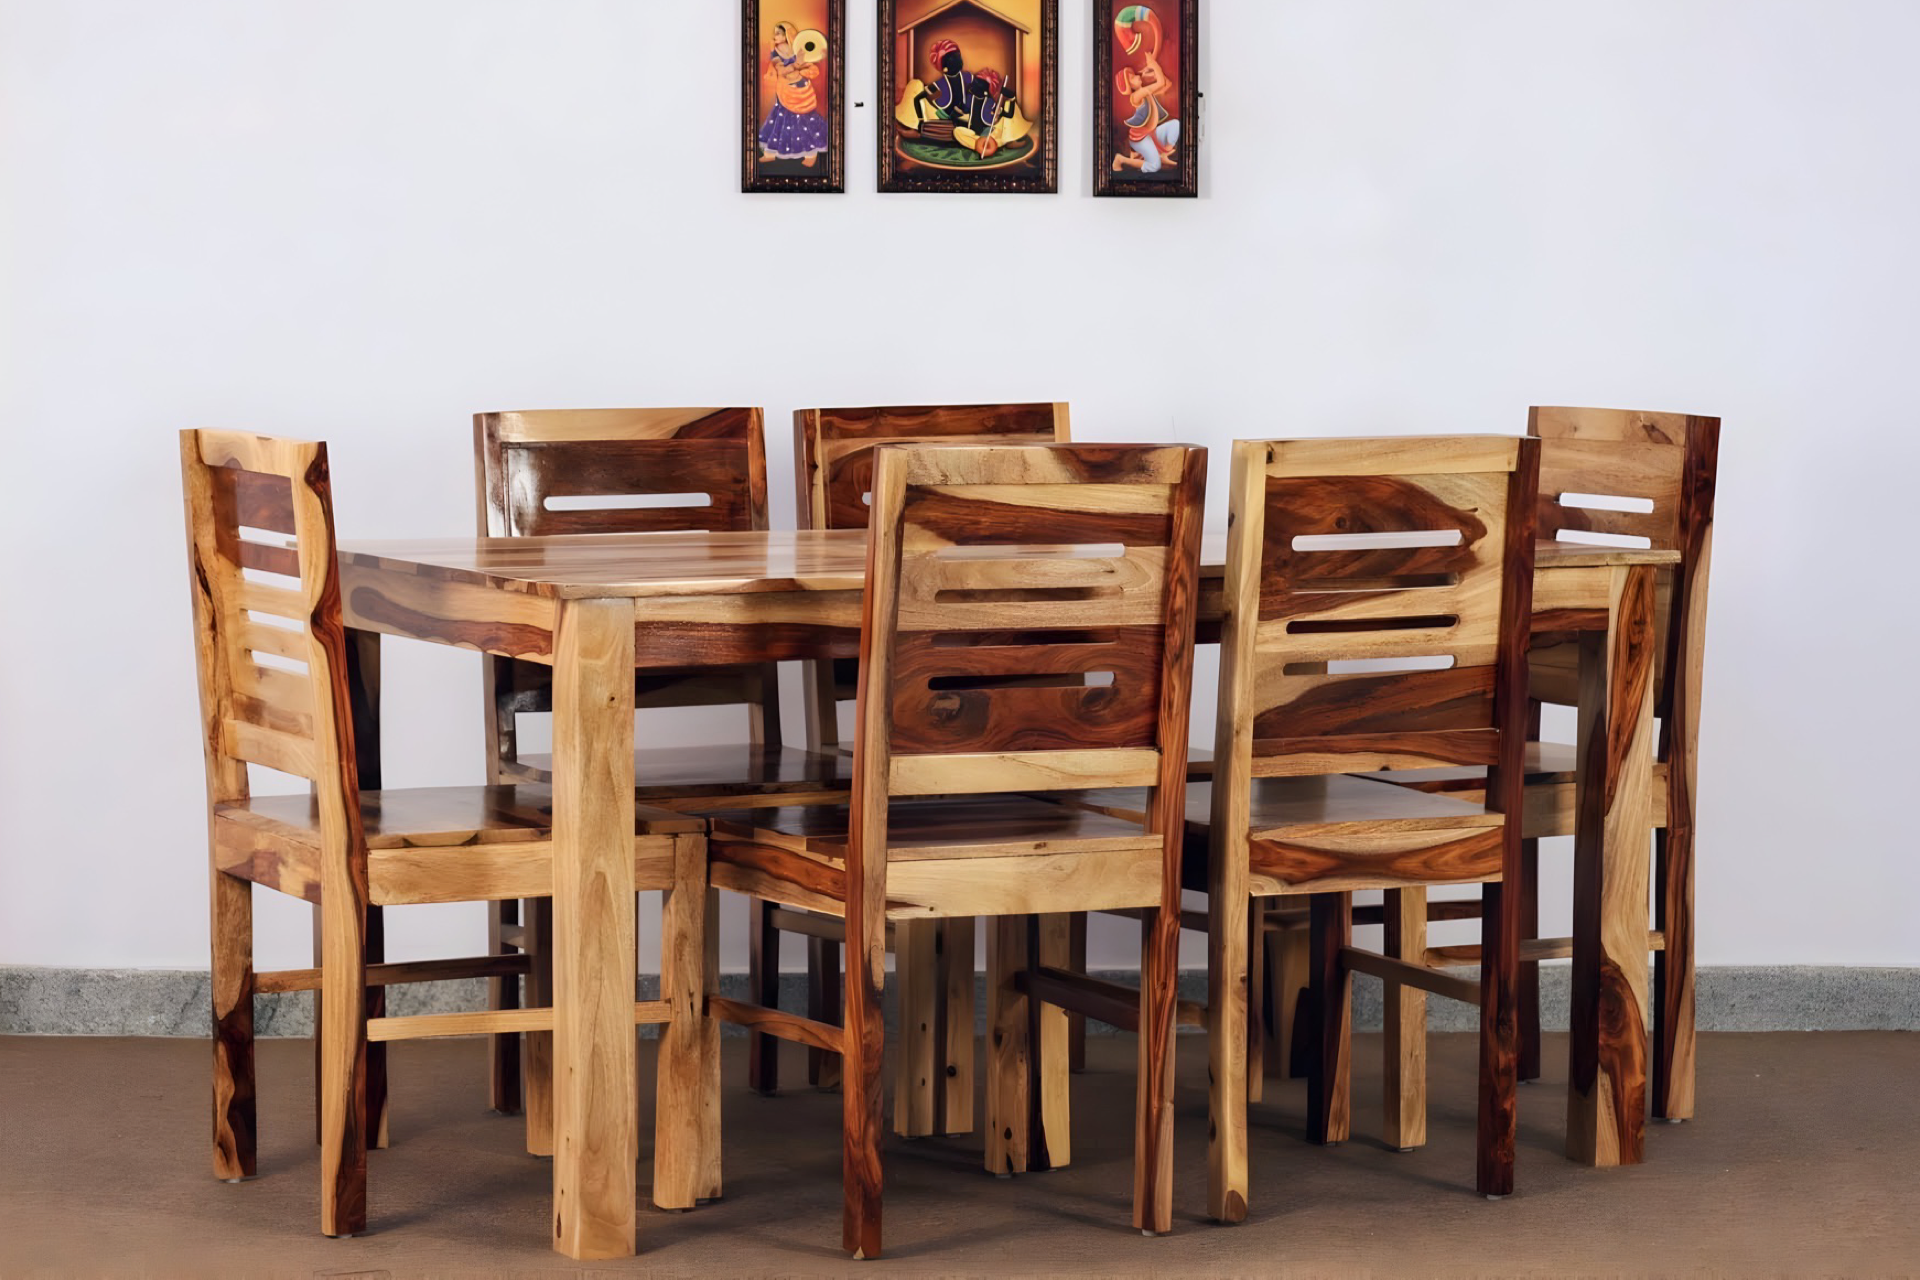 Apple Dining Table Set is perfect for any dining room, crafted with sheesham wood. Buy modern & budget friendly Dining table for your space in Bangalore !